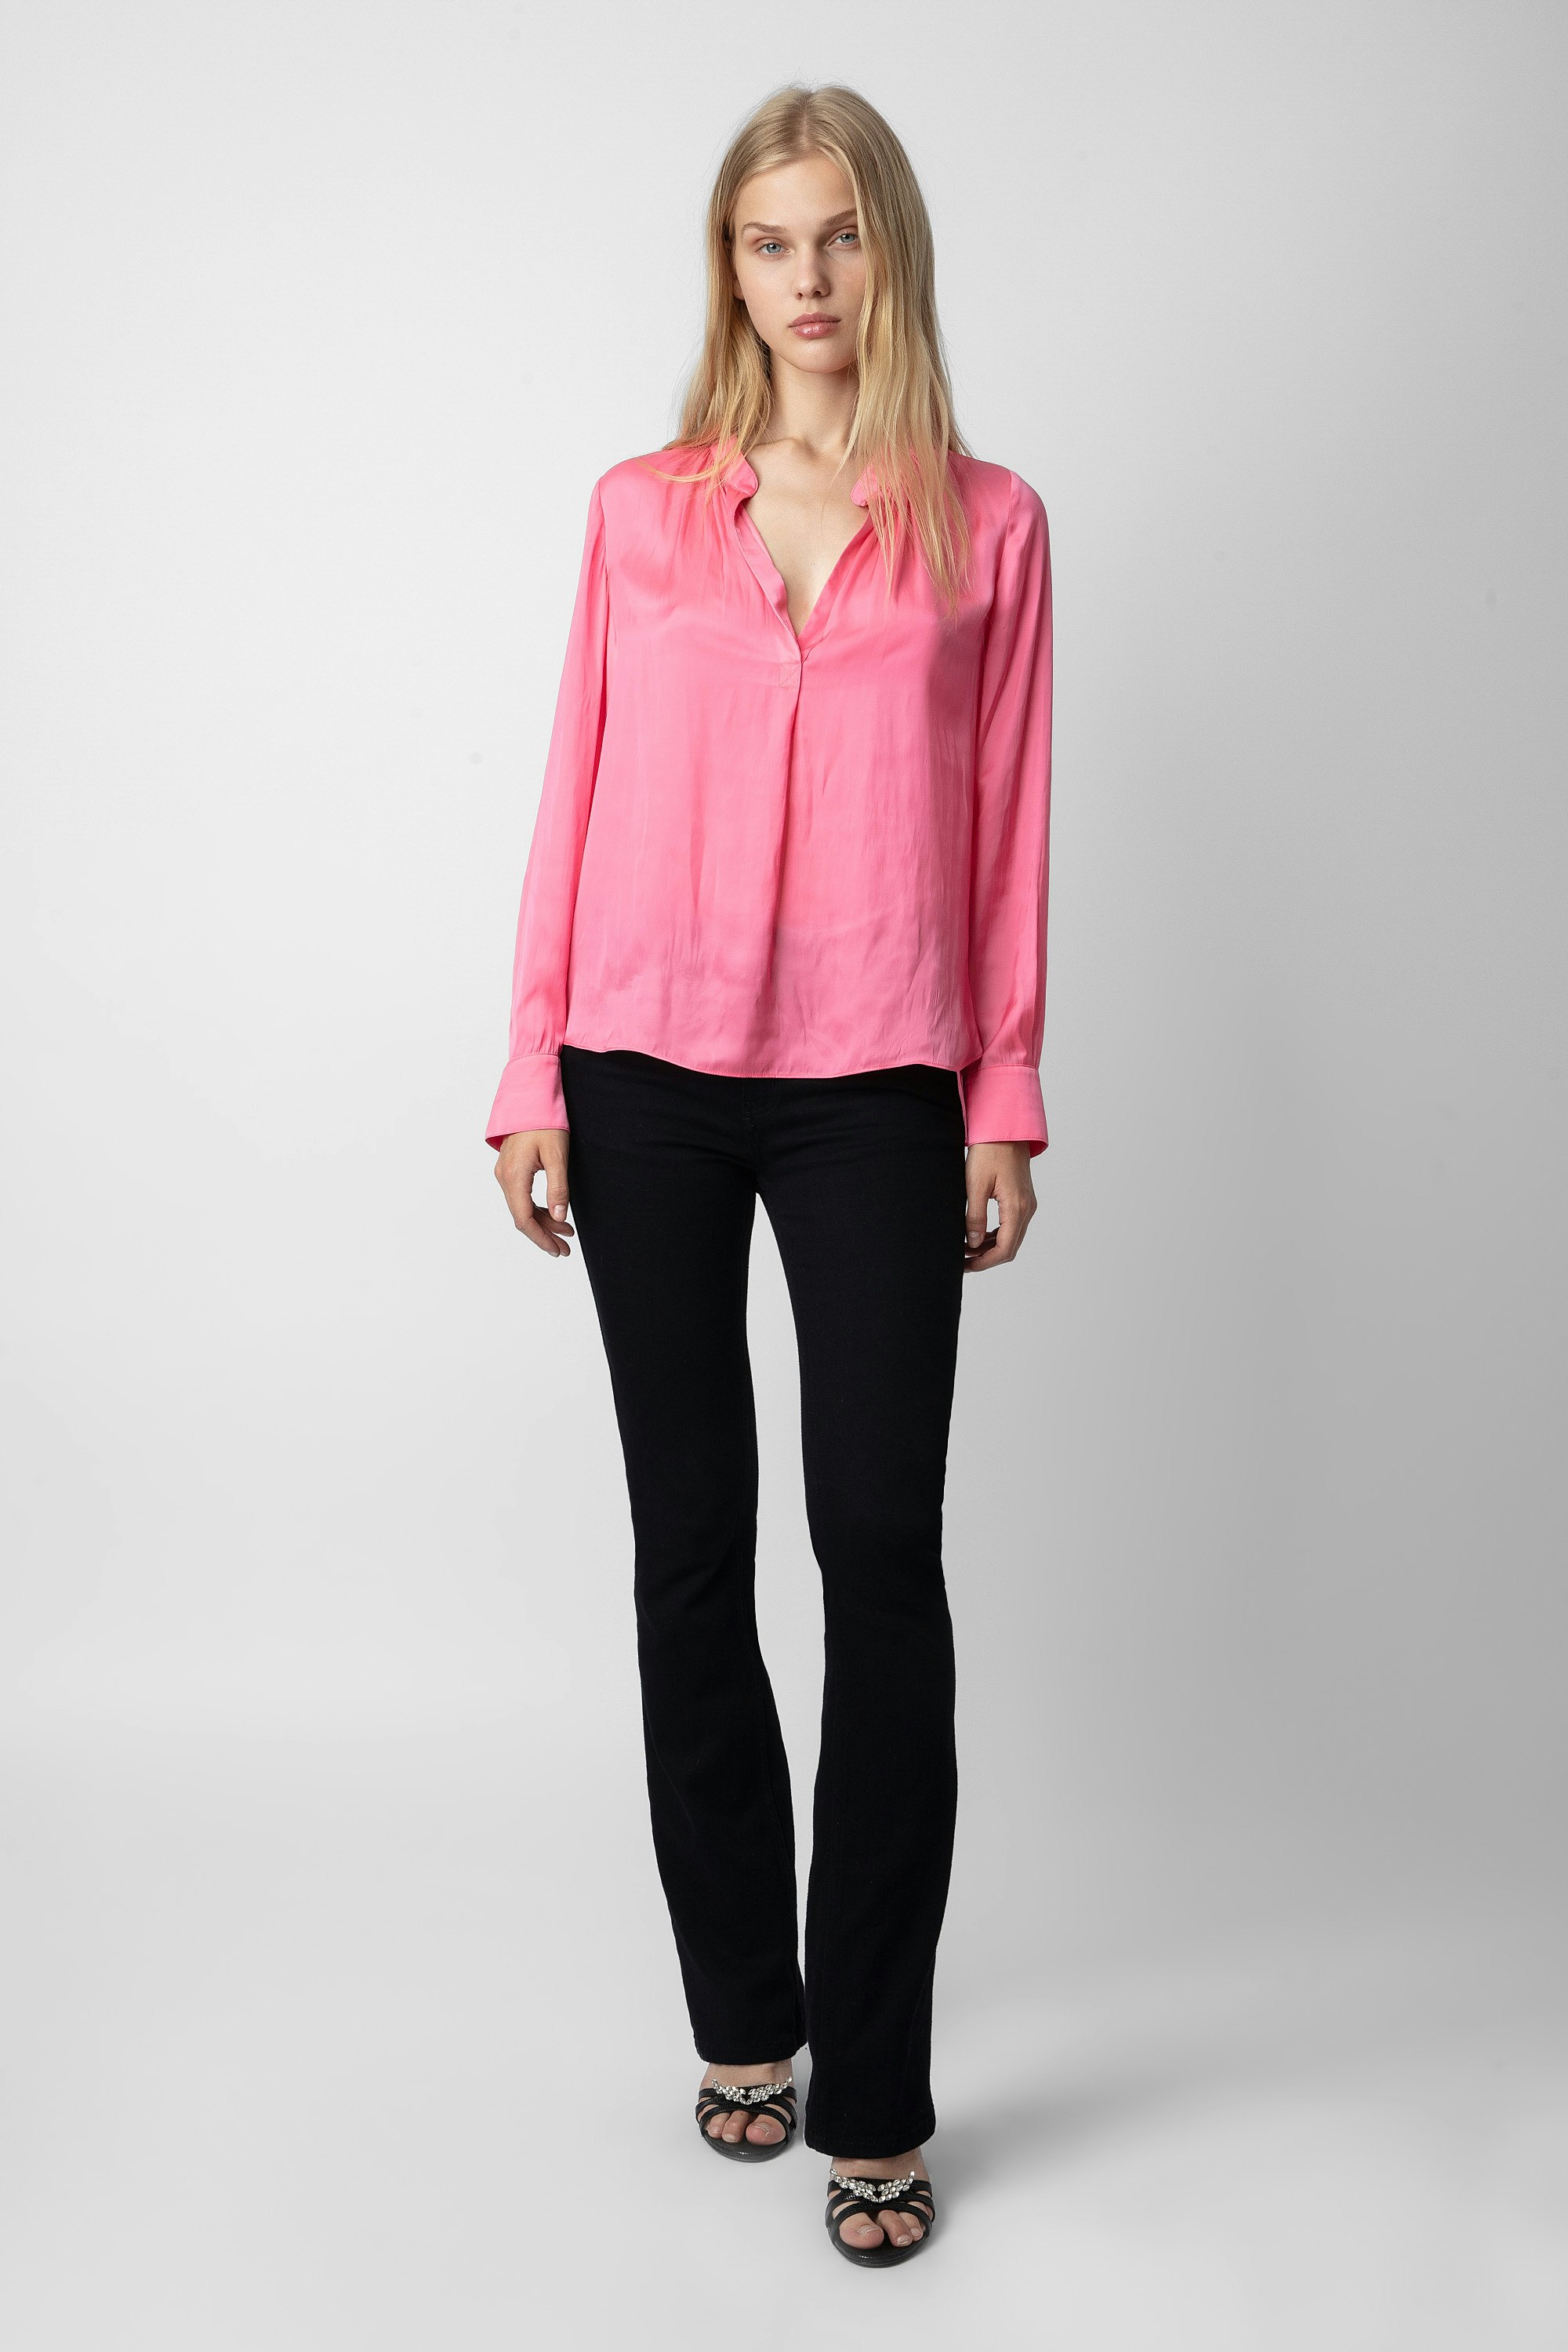 Tink Blouse - Women’s pink blouse with open collar.